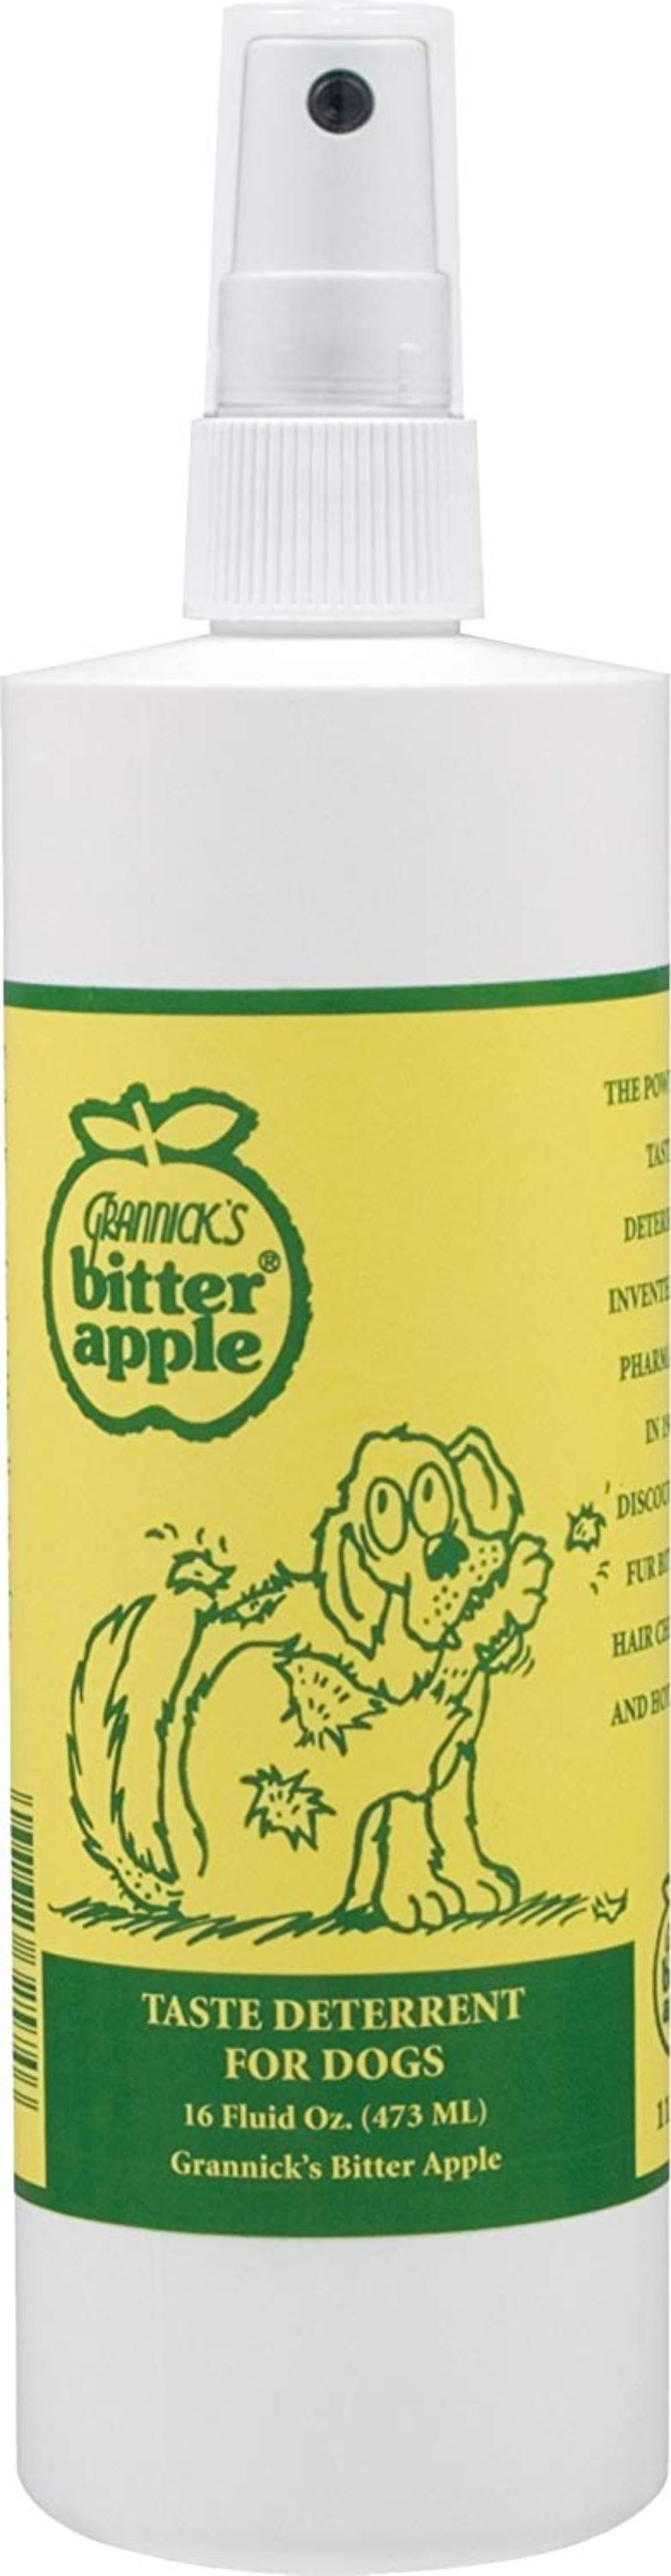 Grannick S Bitter Apple For Dogs Spray Bottle 16 Ounces Discourages Fur Biting By Grannicks Com